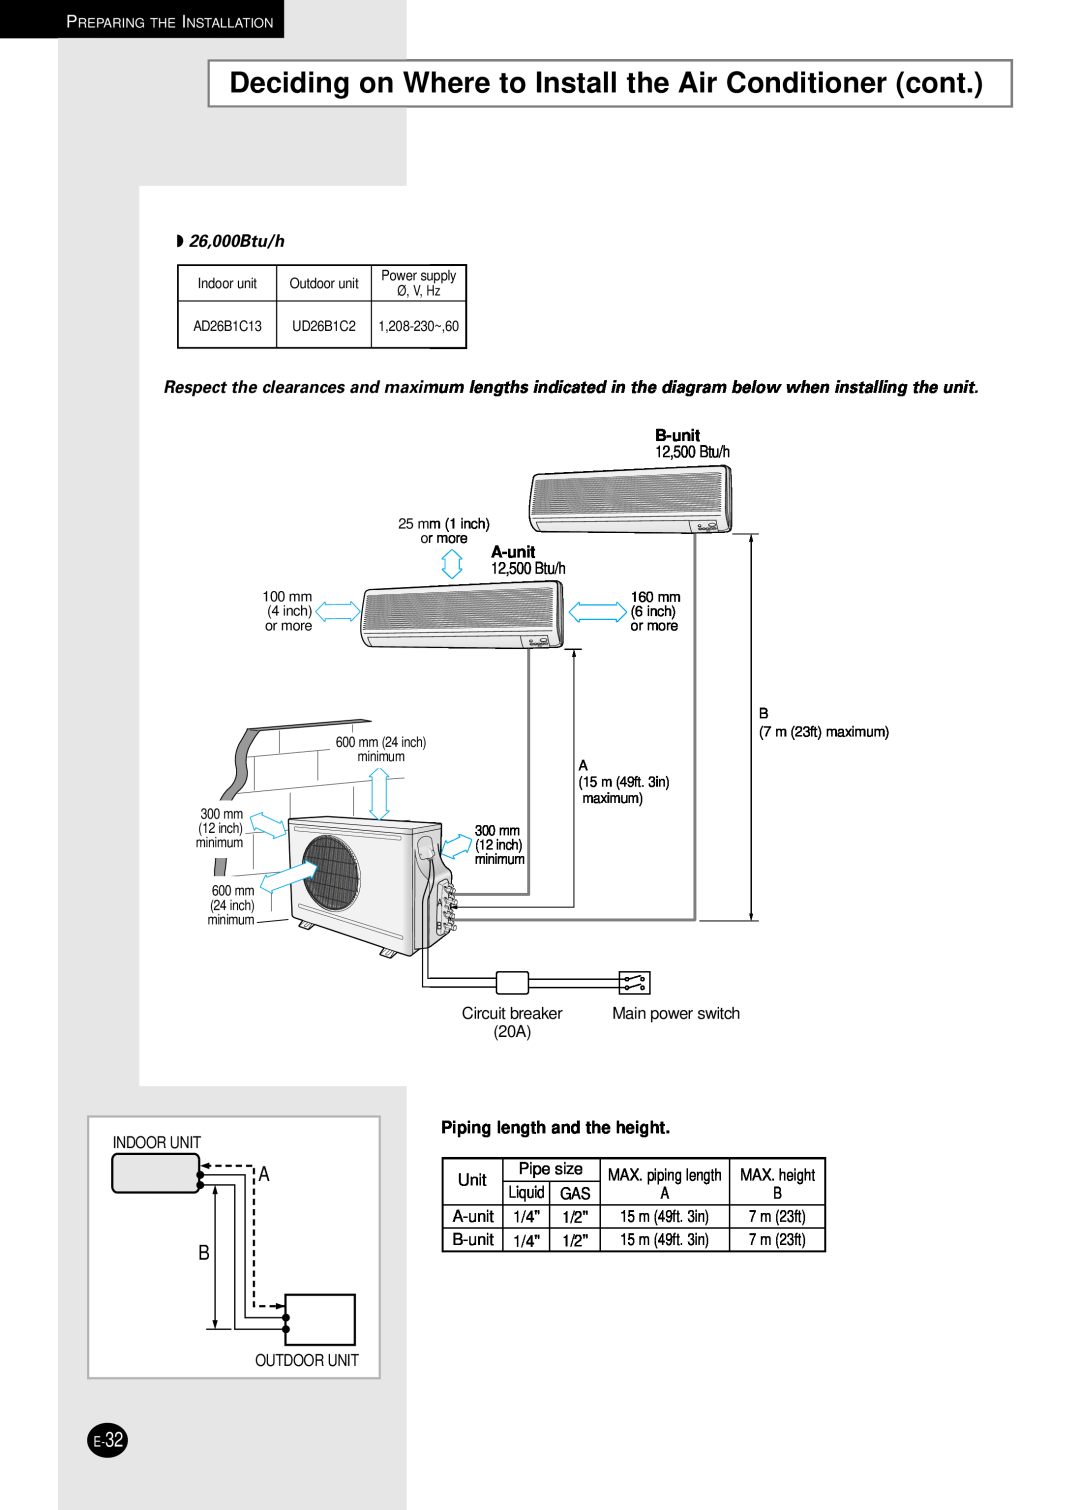 Samsung AD18B1C09 installation manual 26,000Btu/h, B-unit, A-unit, Piping length and the height, E-32 